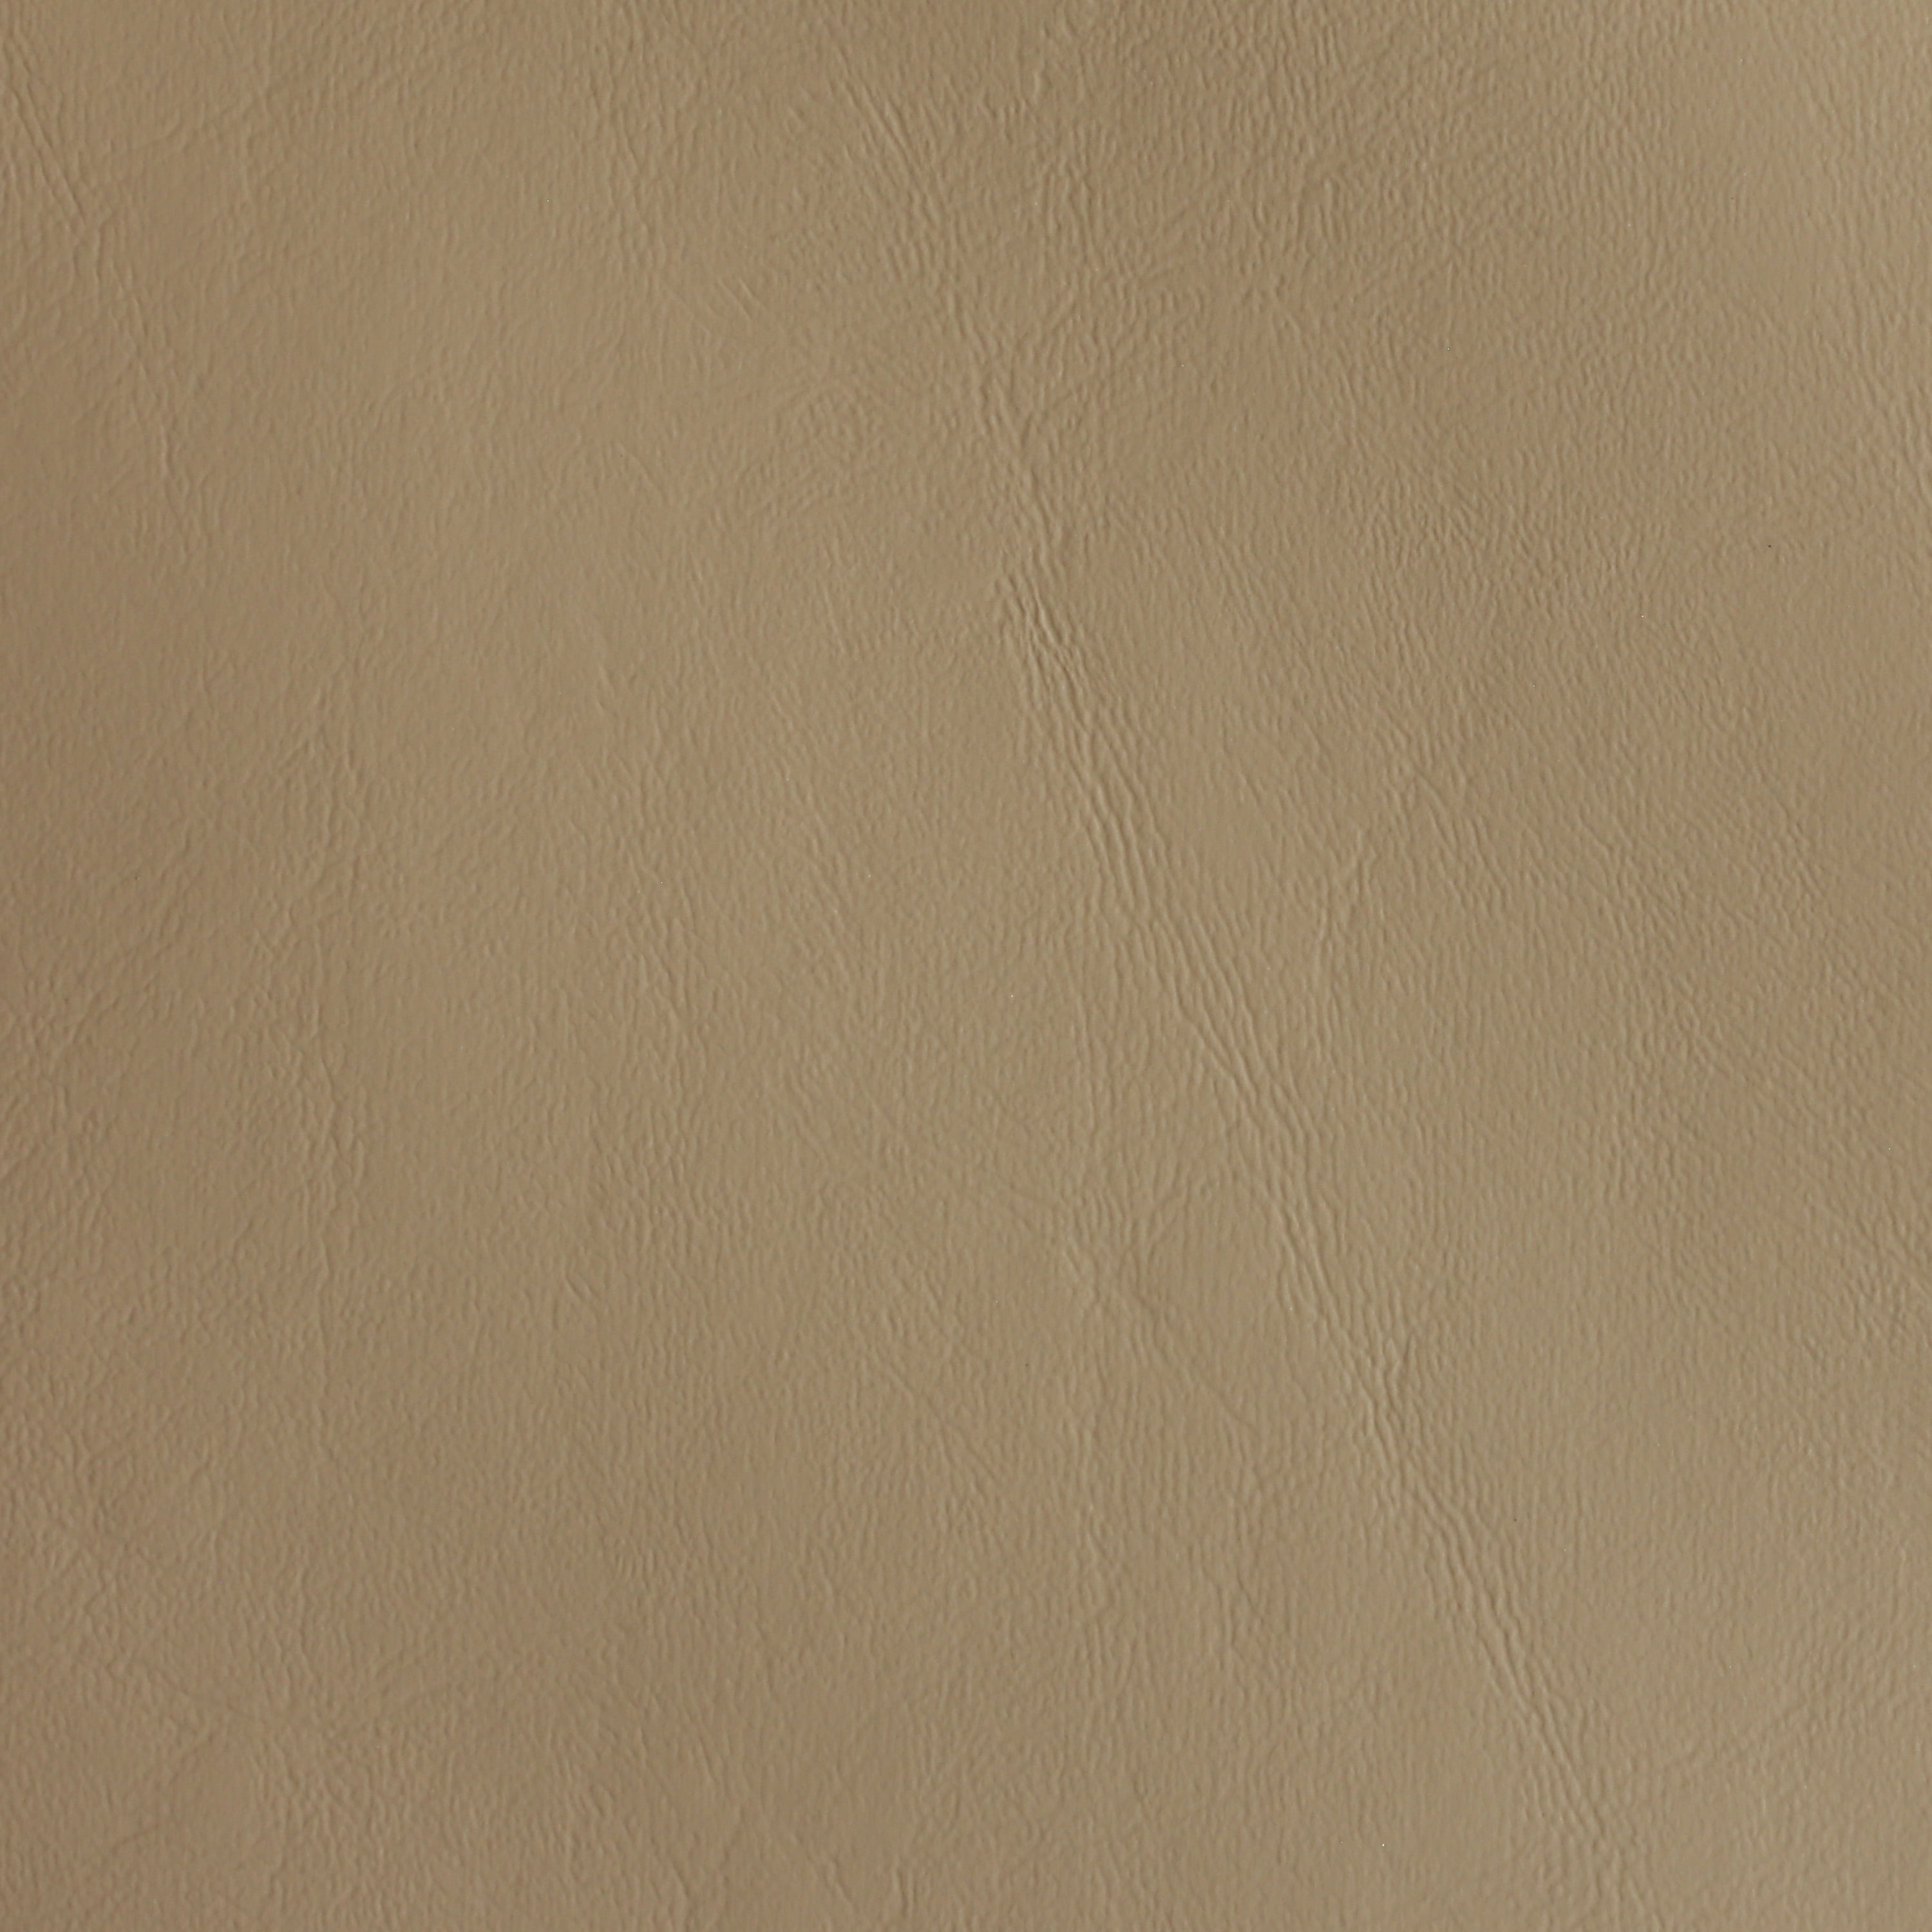 Beige Faux Leather, Vinyl Upholstery Fabric, 54 W, By the Yard